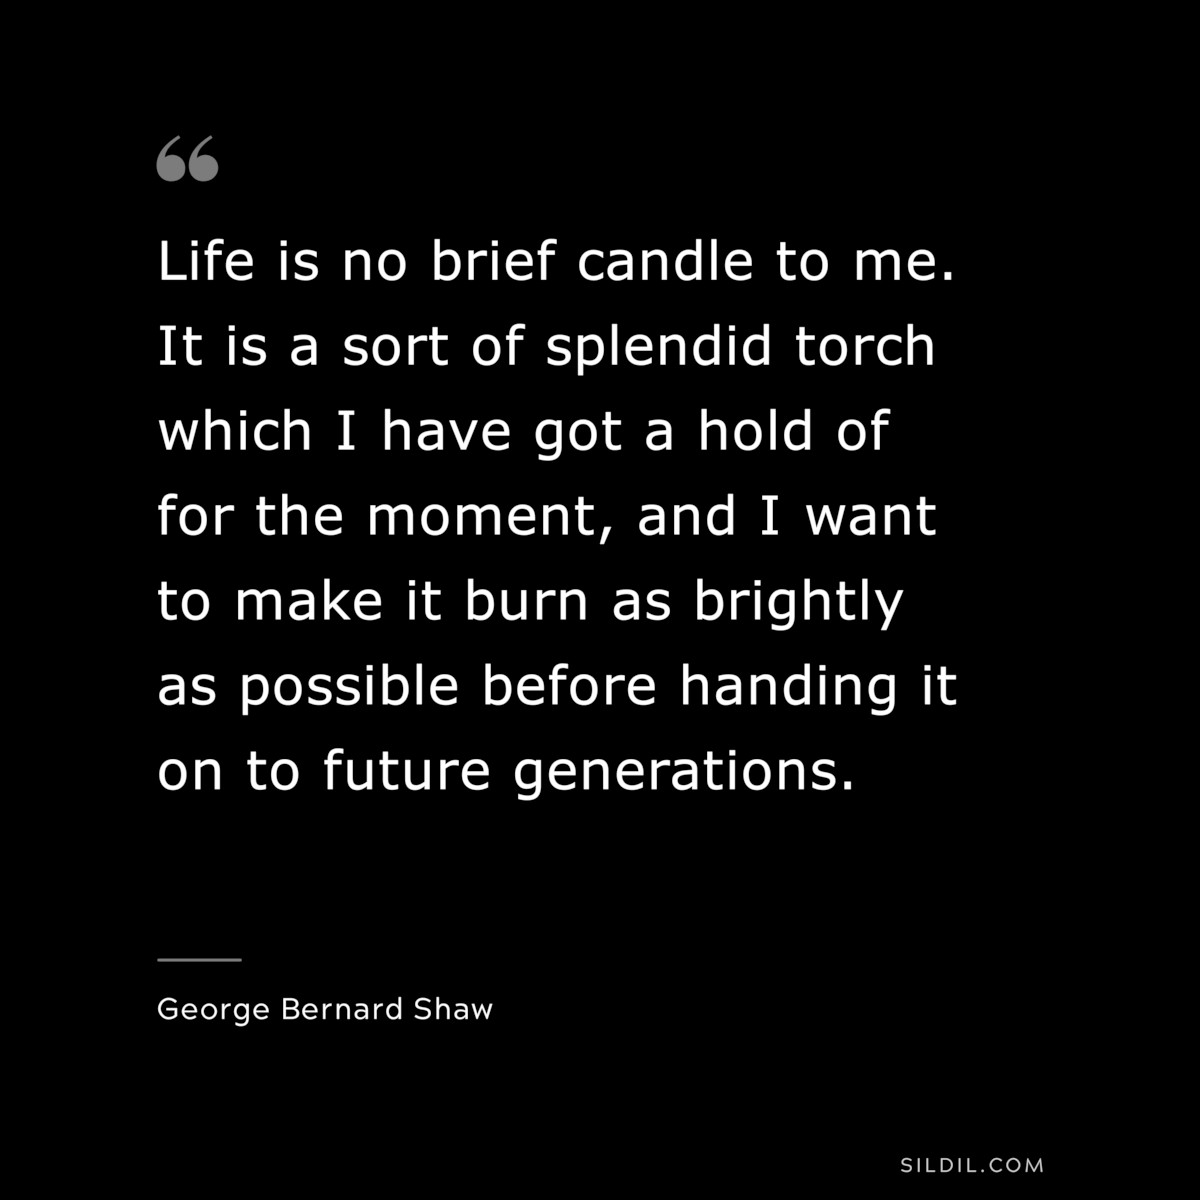 Life is no brief candle to me. It is a sort of splendid torch which I have got a hold of for the moment, and I want to make it burn as brightly as possible before handing it on to future generations. ― George Bernard Shaw